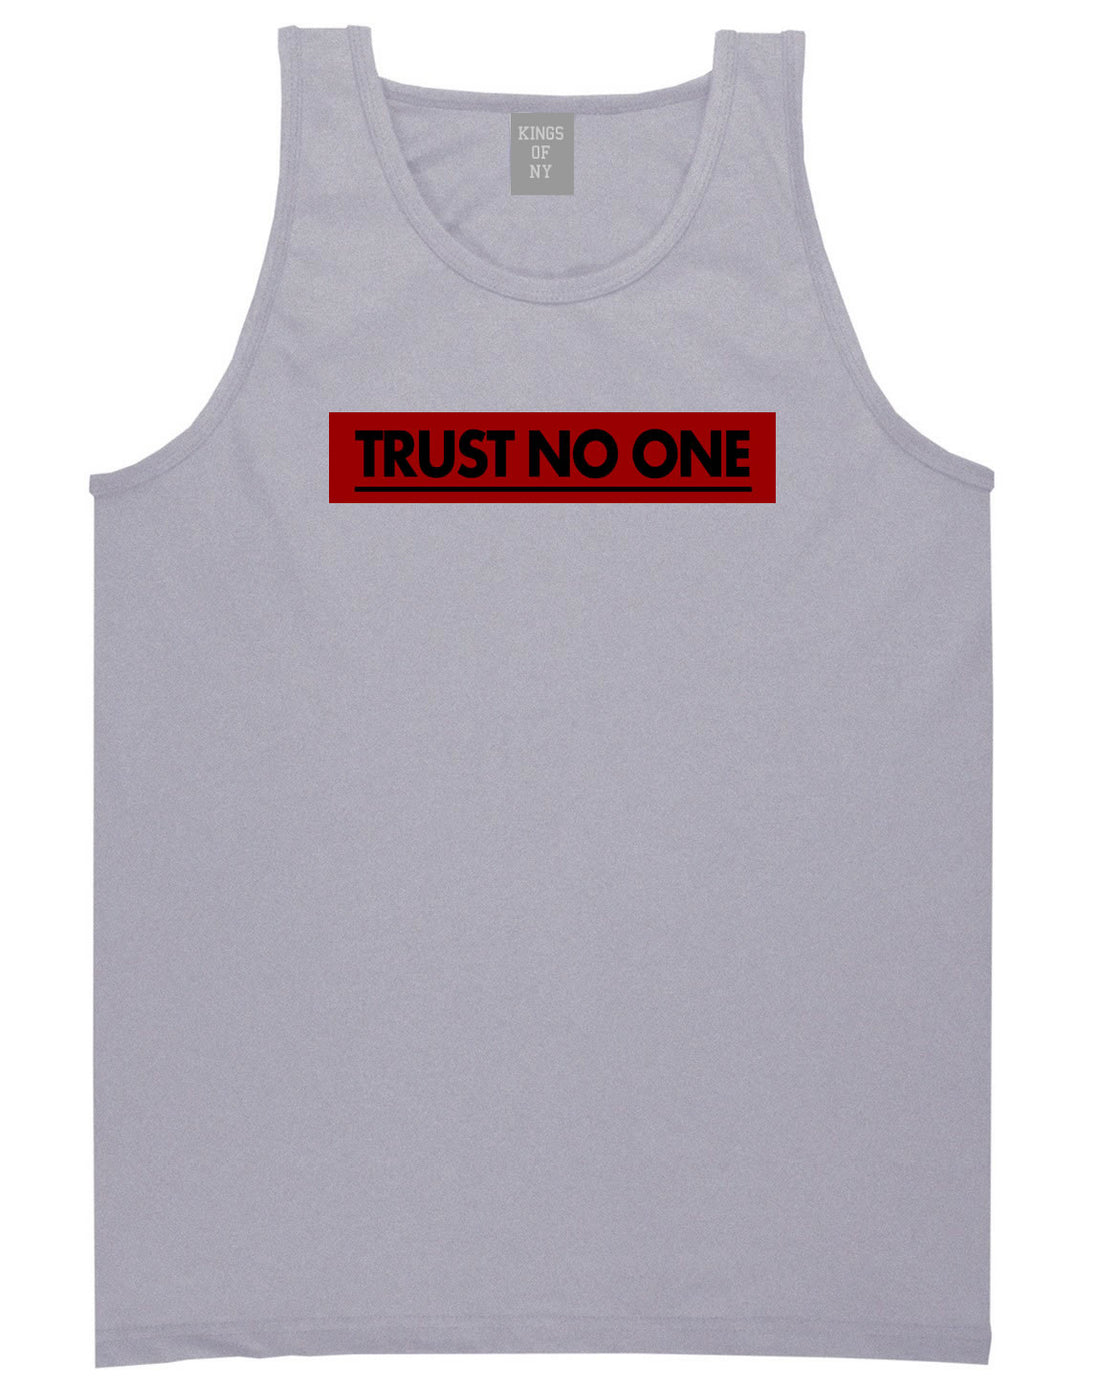 Trust No One Tank Top in Grey By Kings Of NY